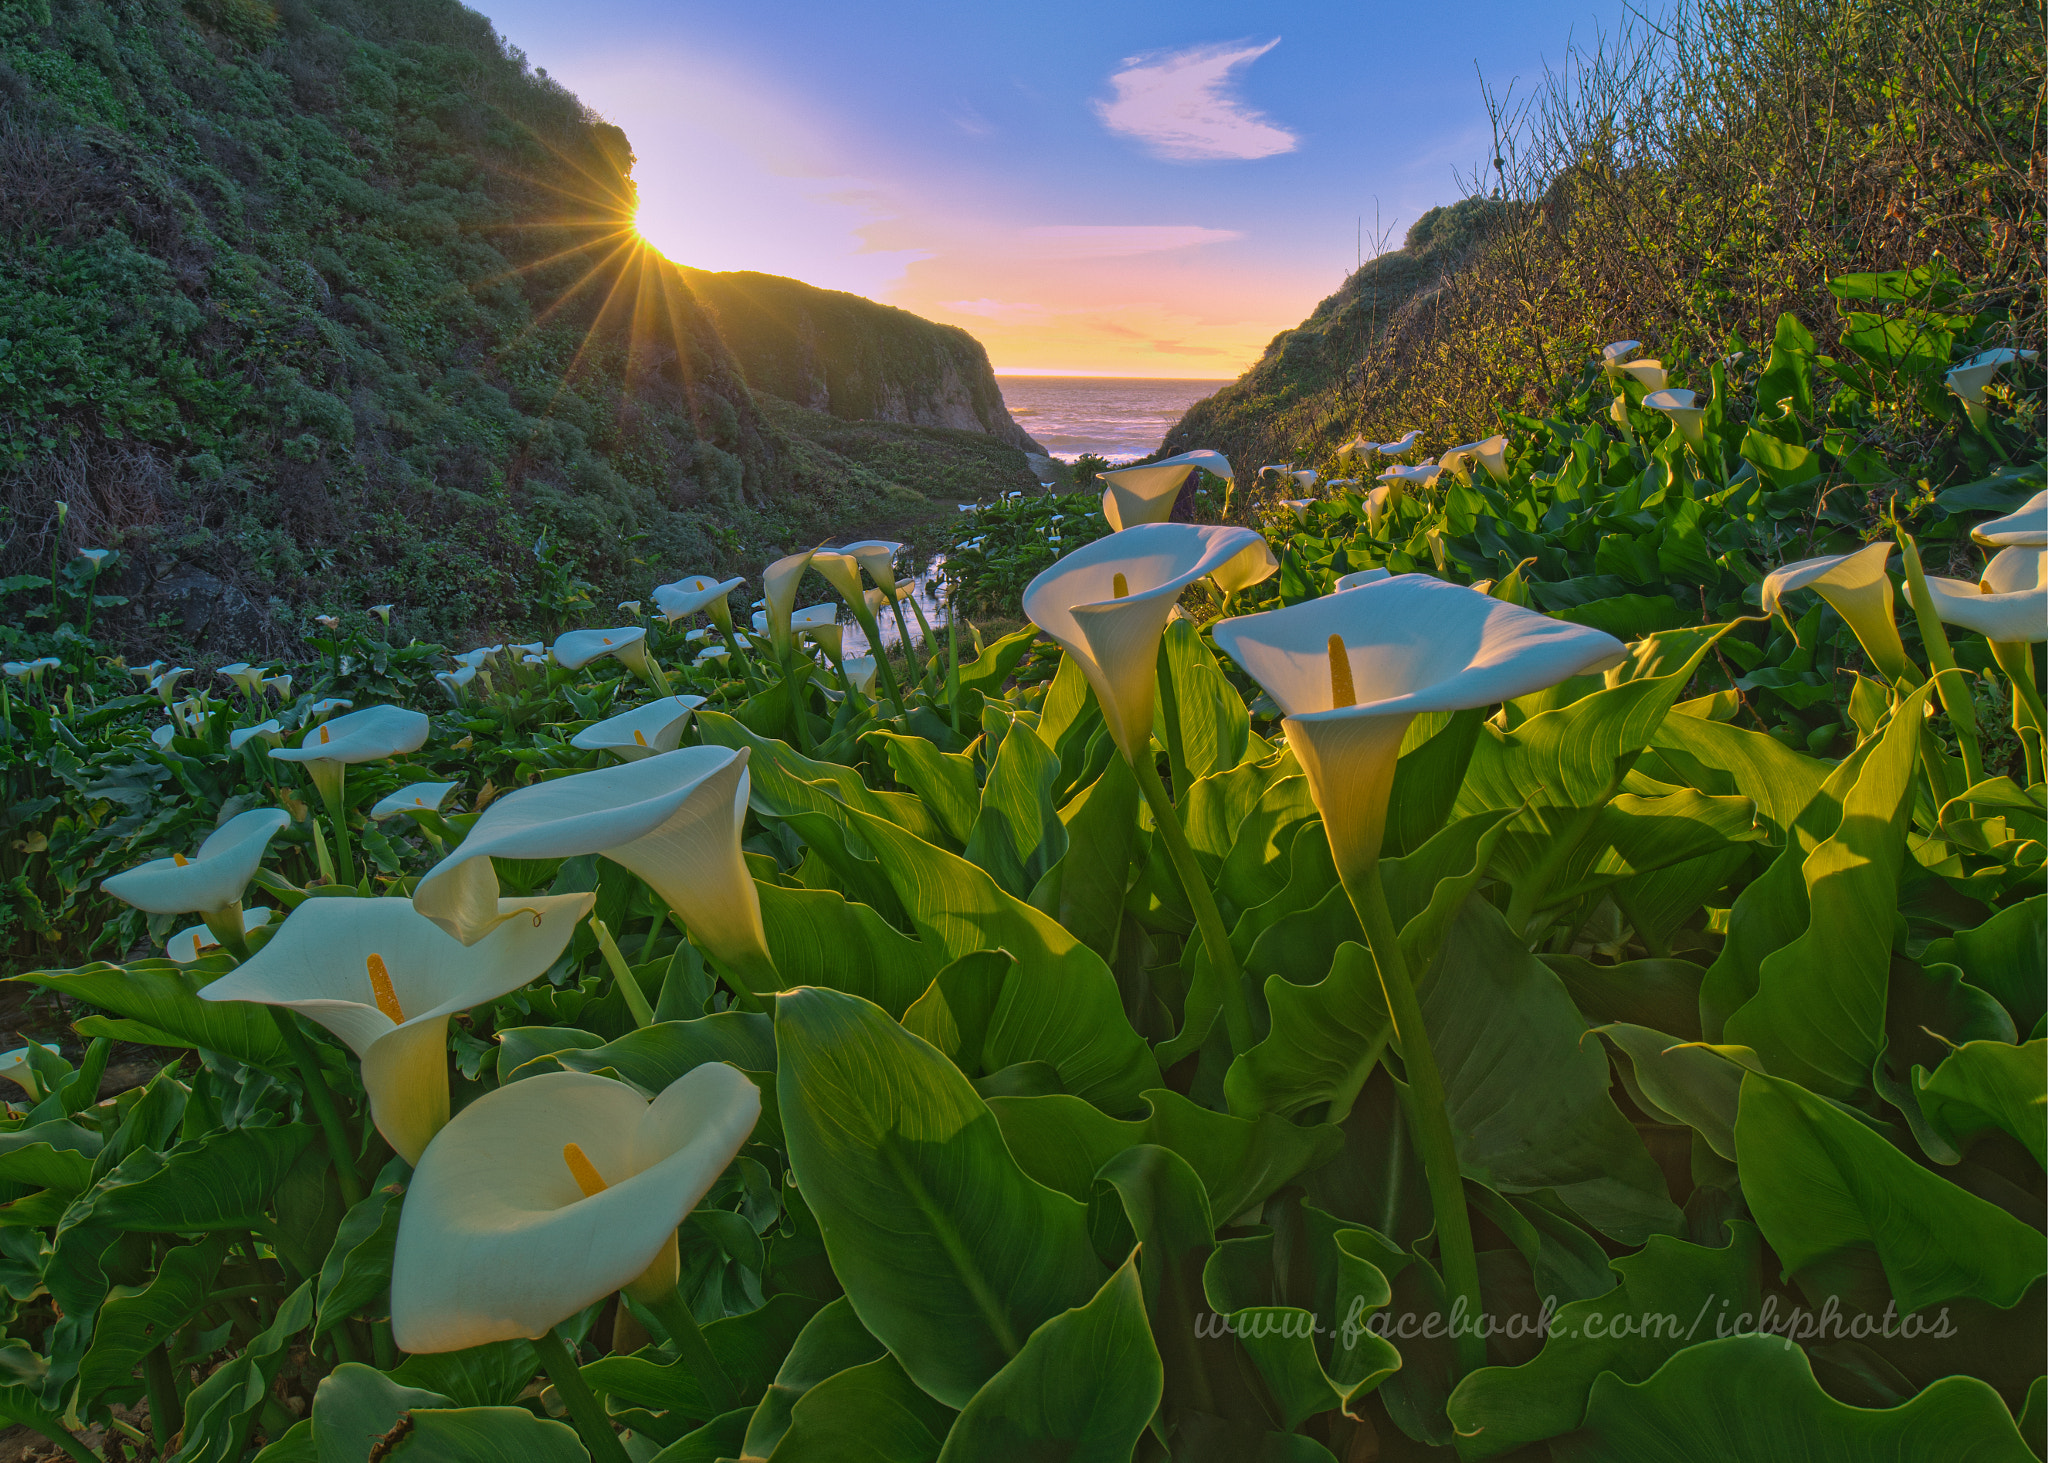 16-35mm F4 OSS sample photo. Calla lily photography